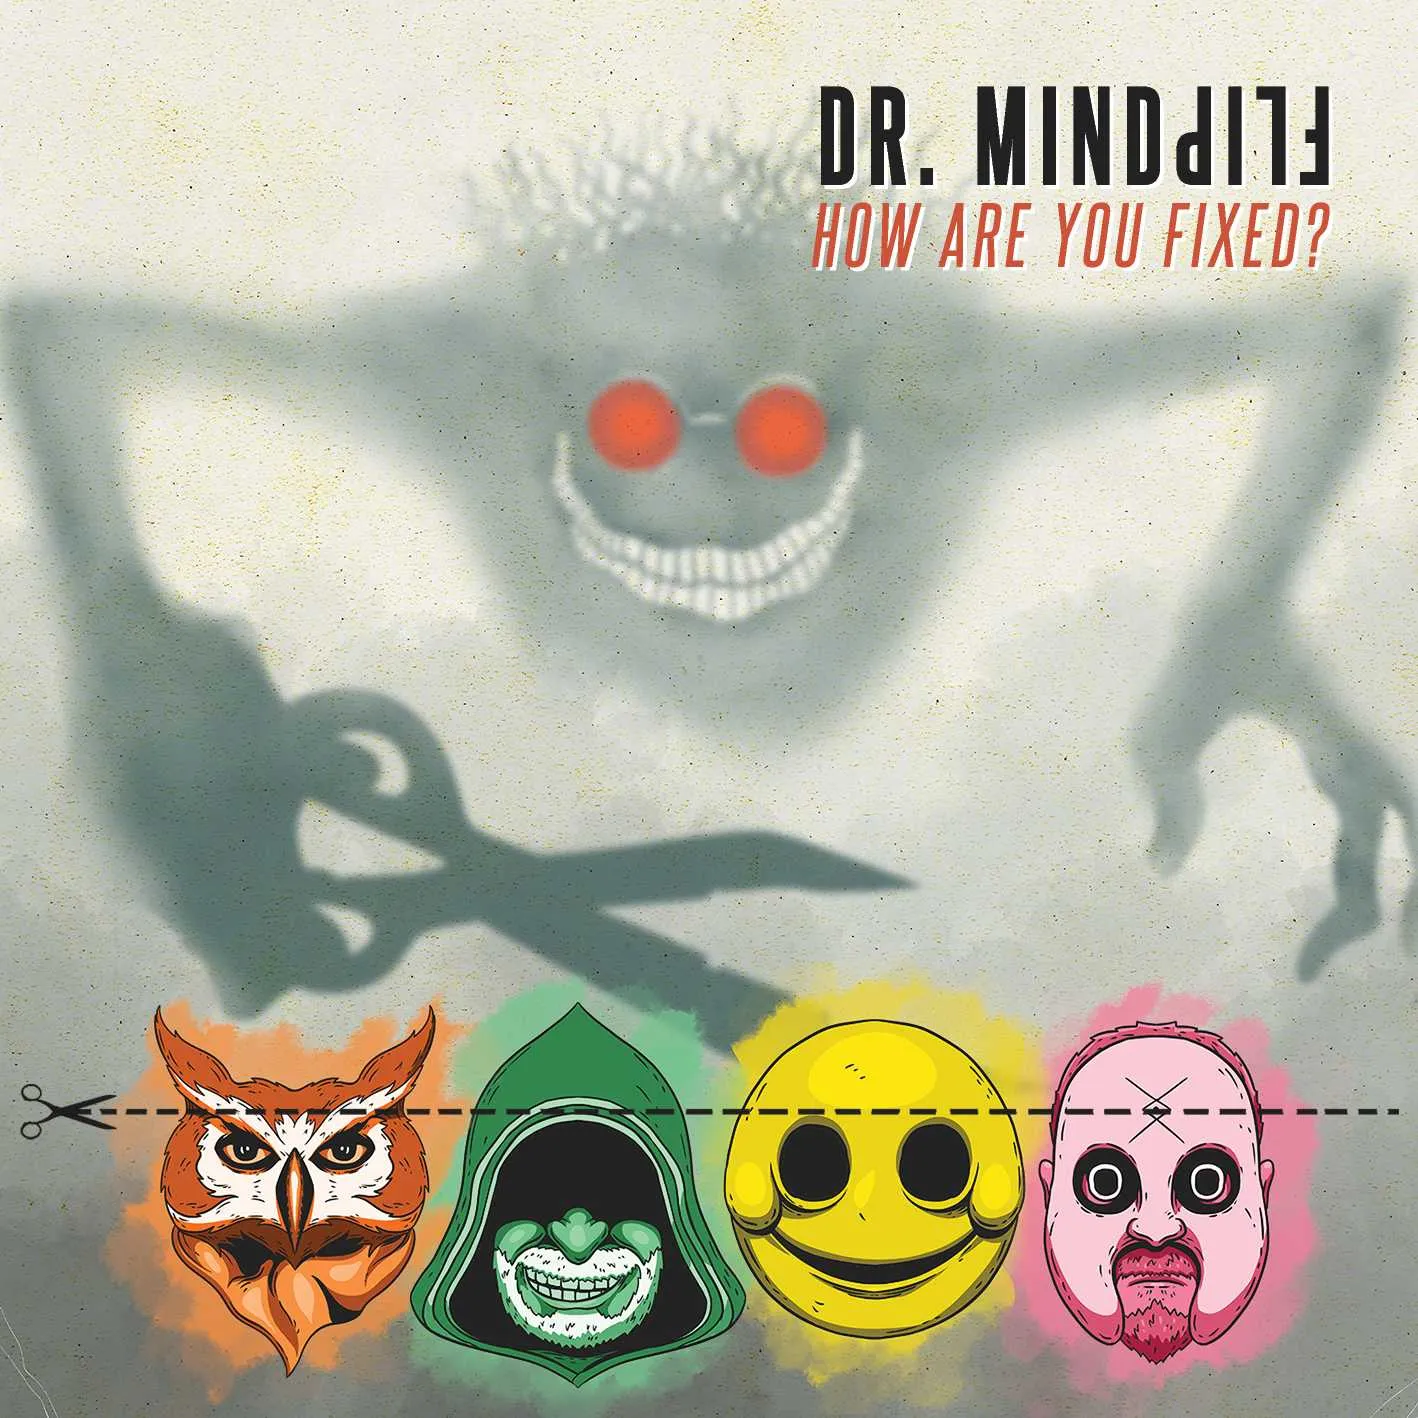 Album cover for “How are you fixed?” by Dr. Mindflip